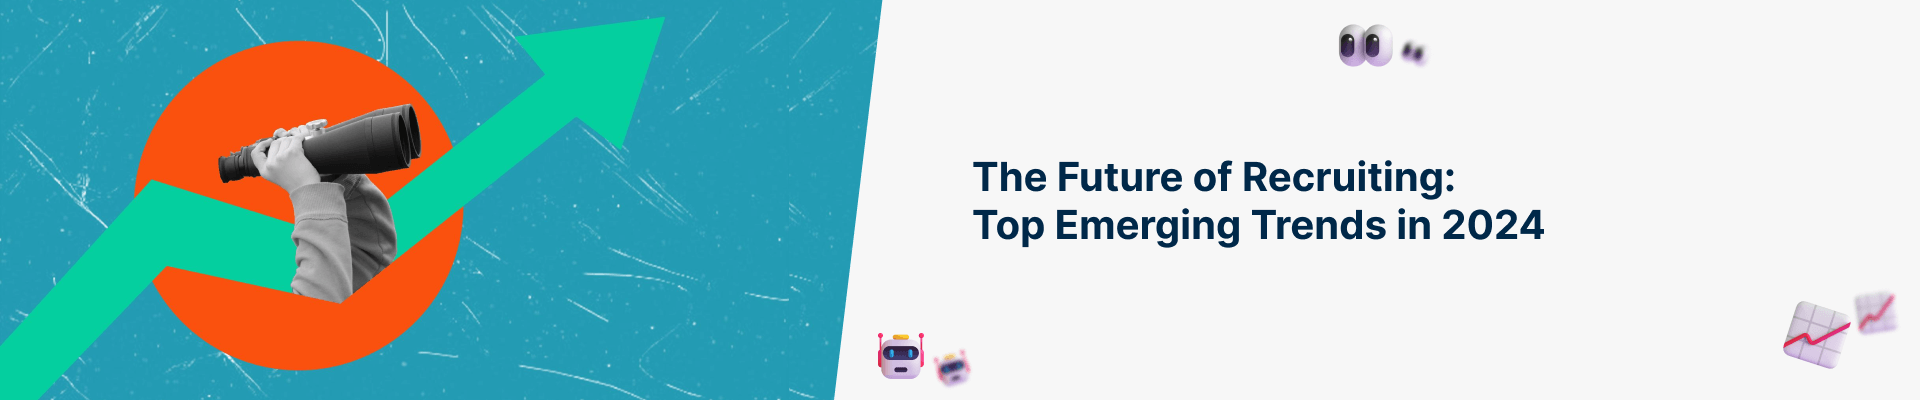 The Future of Recruiting Top Emerging Trends in 2024